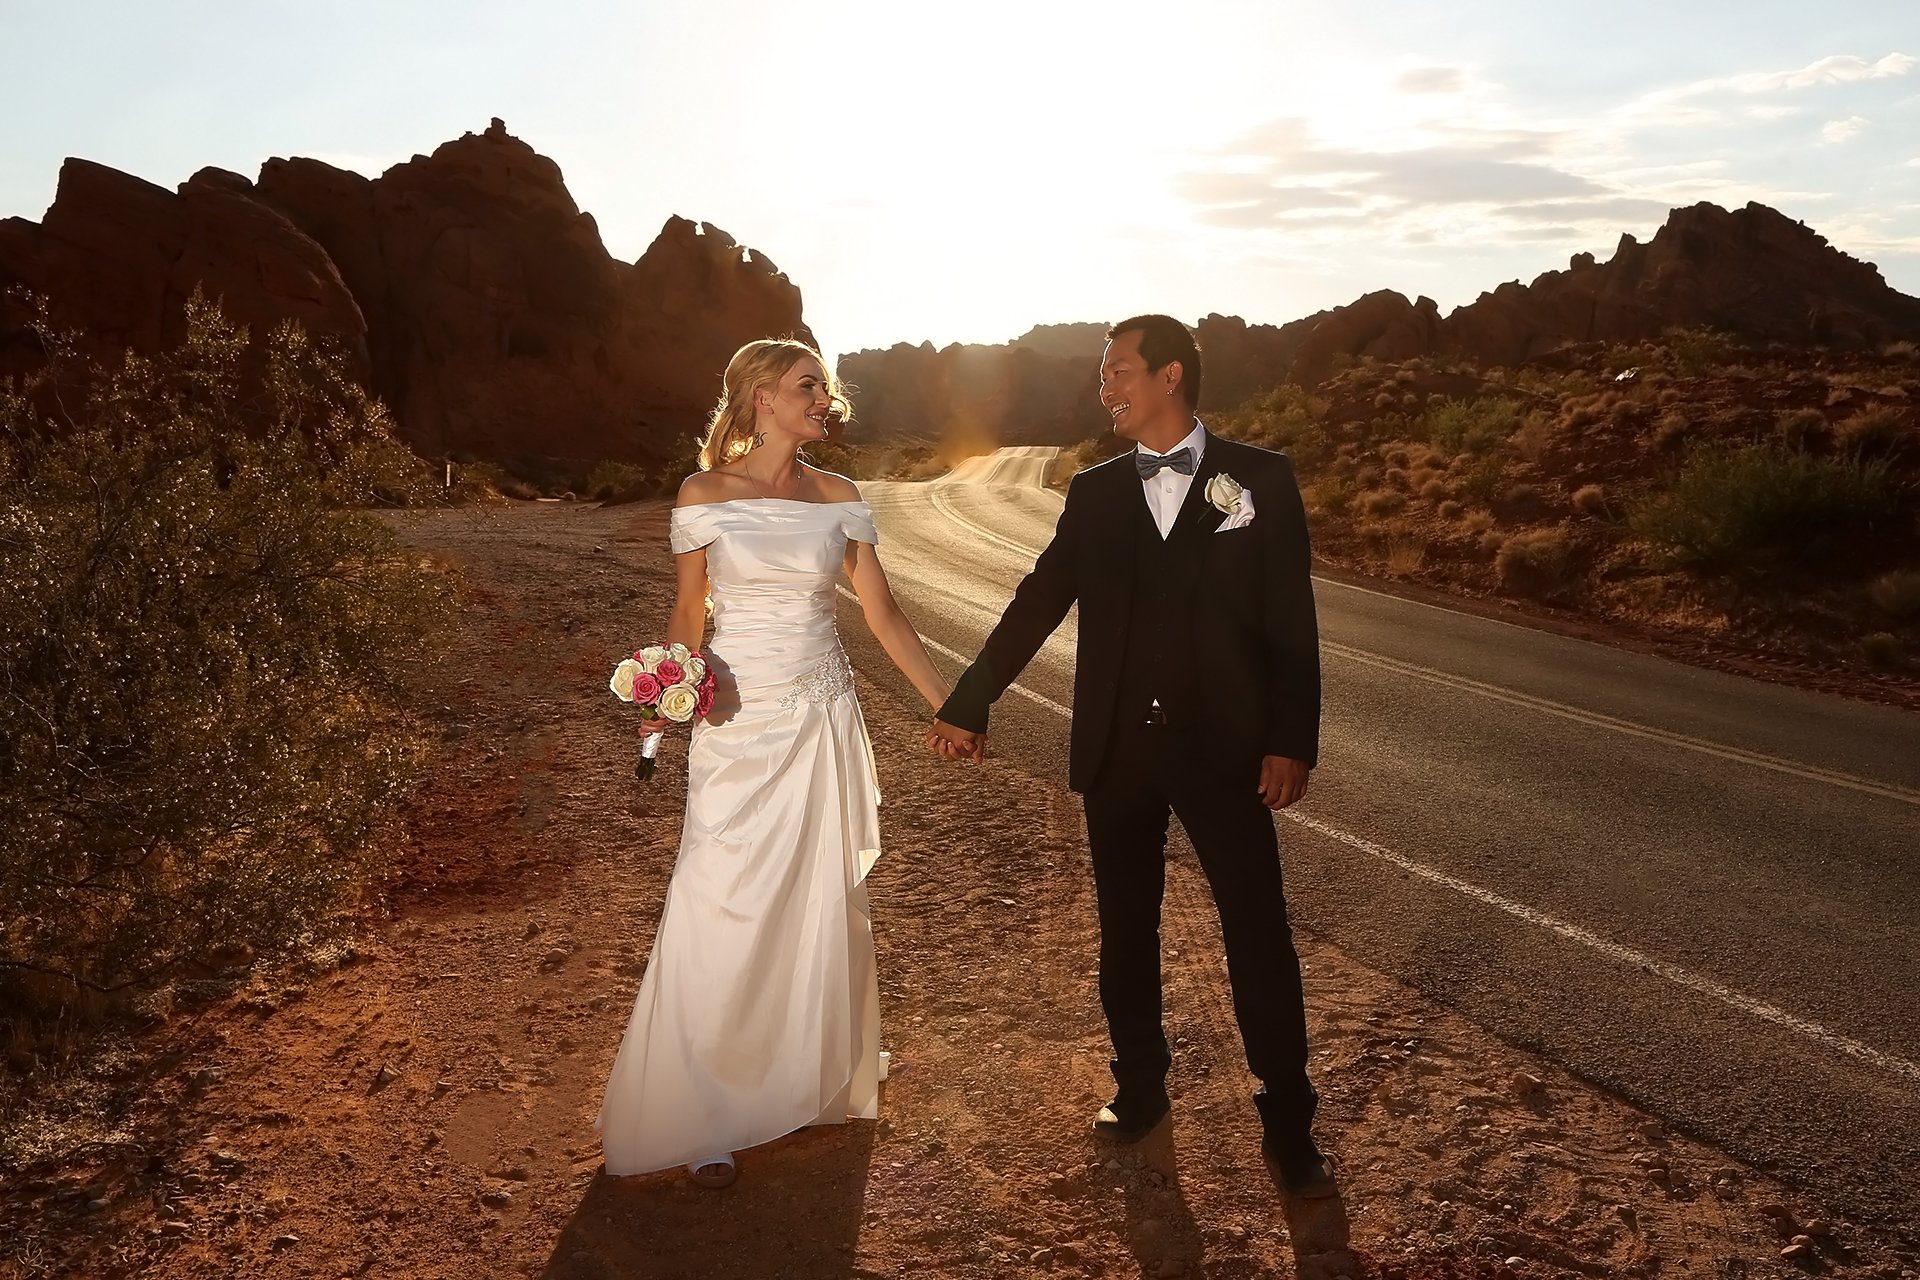 A bride and groom holding hands on a desert road.